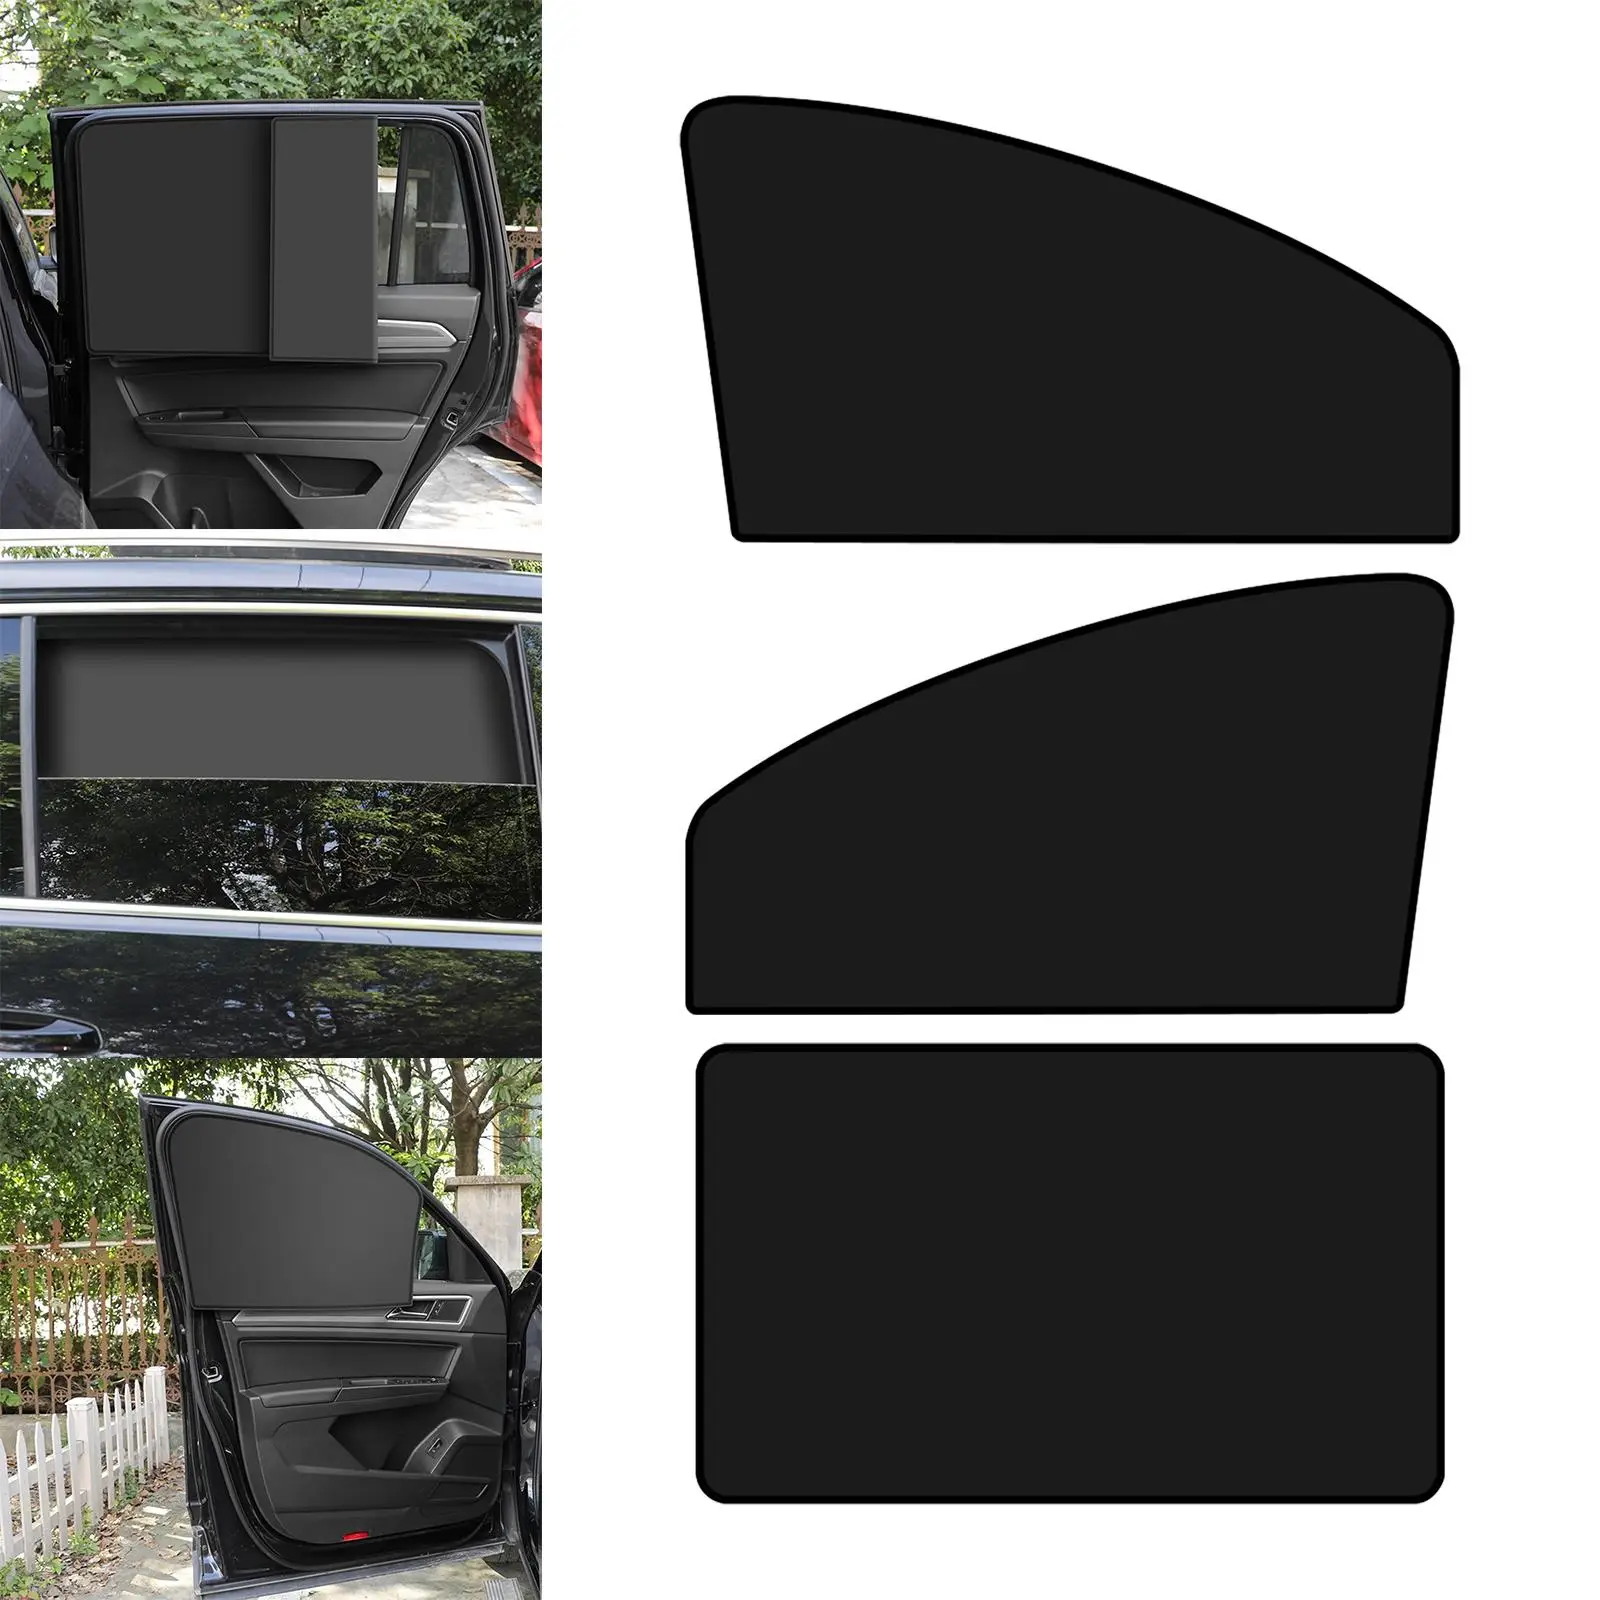 Universal Magnetic Car Window Sunshade Blackout Maintains Car Interior Temperature Sun Shade Covers for Camping Baby